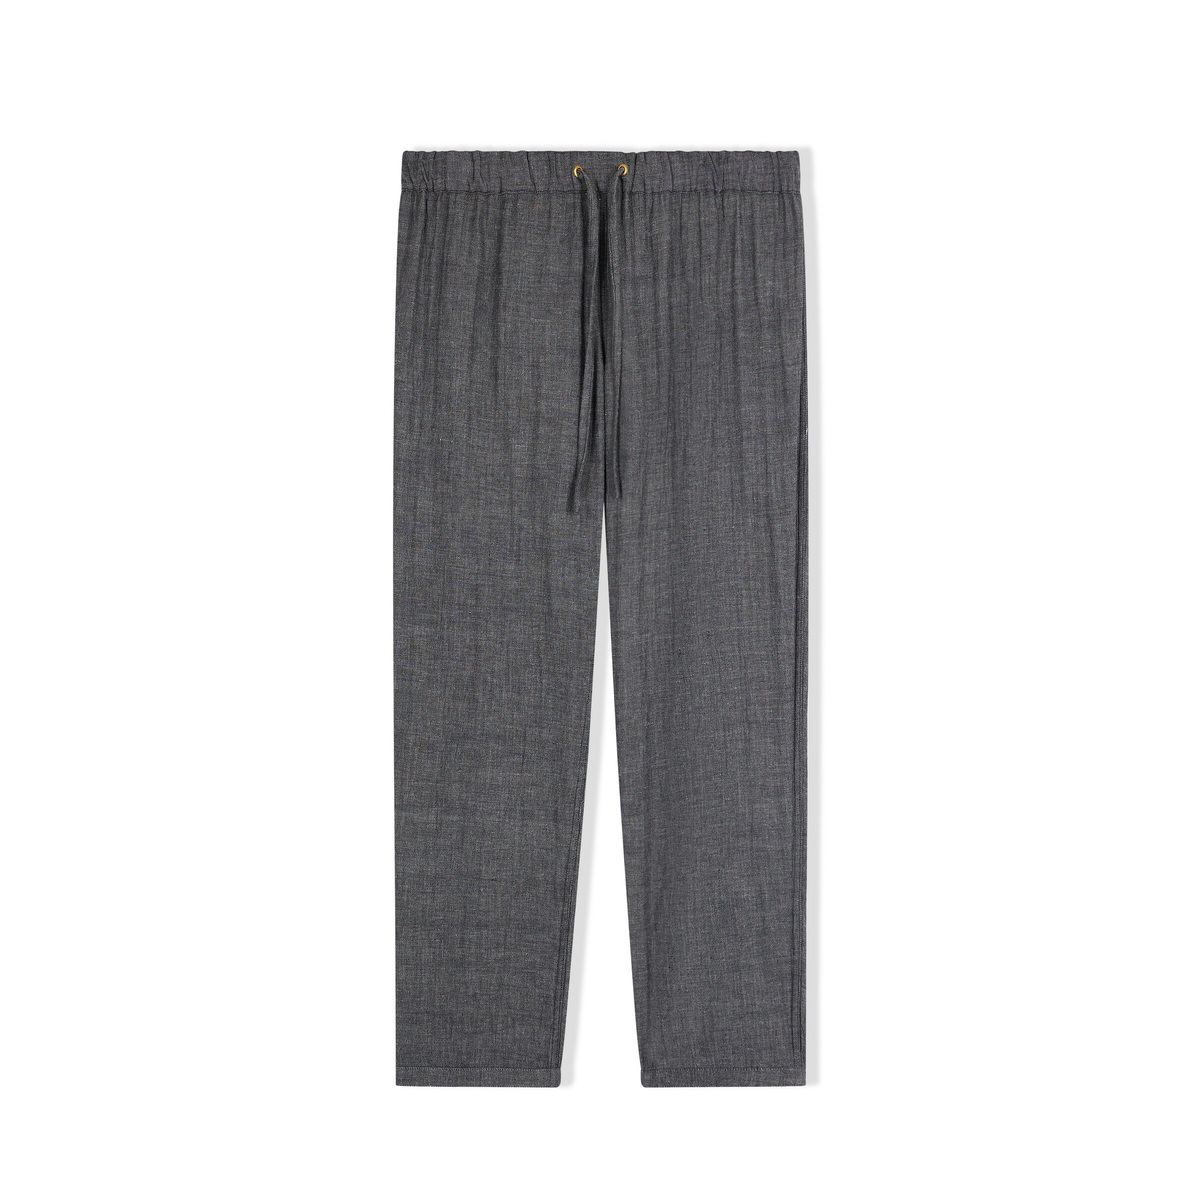 Sibelle Reversible Trousers, Black and white - 100% cotton - image 1